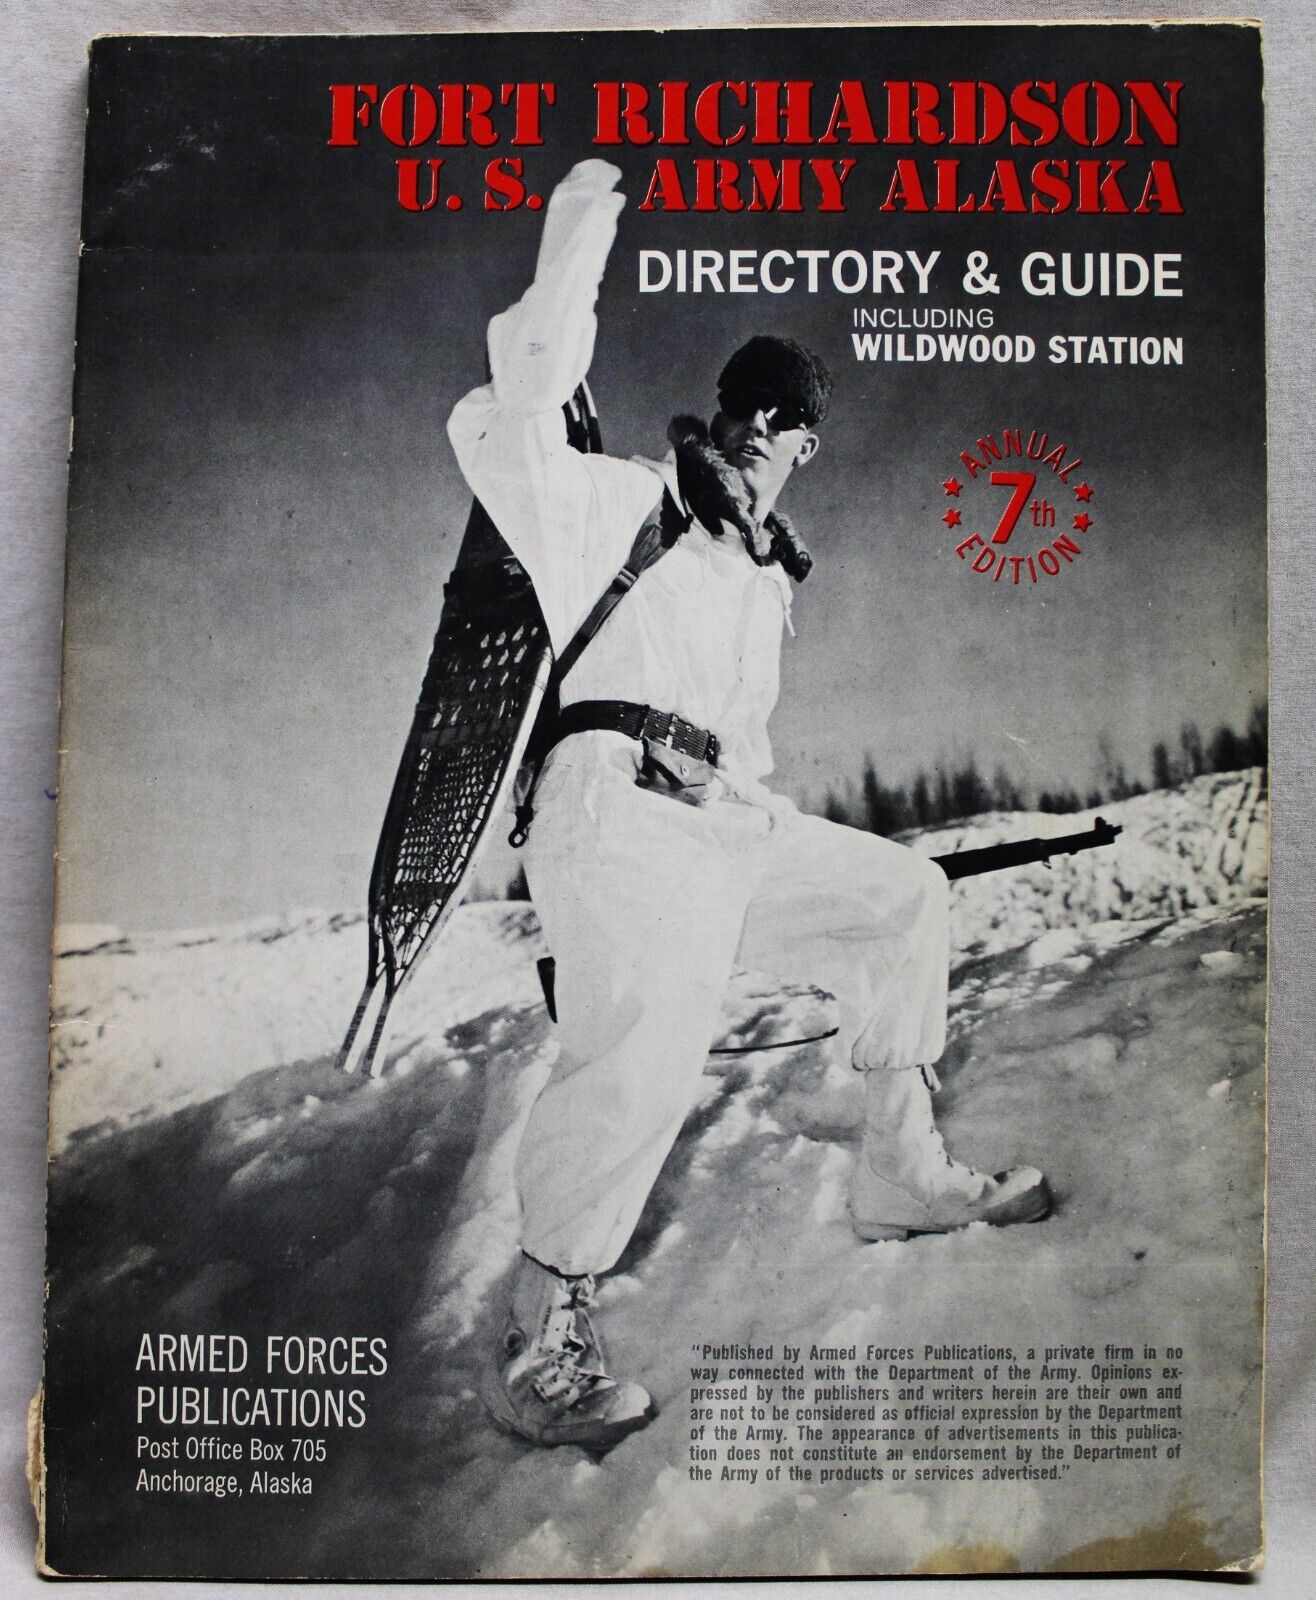 U.S. ARMY BASE FORT RICHARDSON ANCHORAGE ALASKA 7th EDITION GUIDE BOOK 1960s